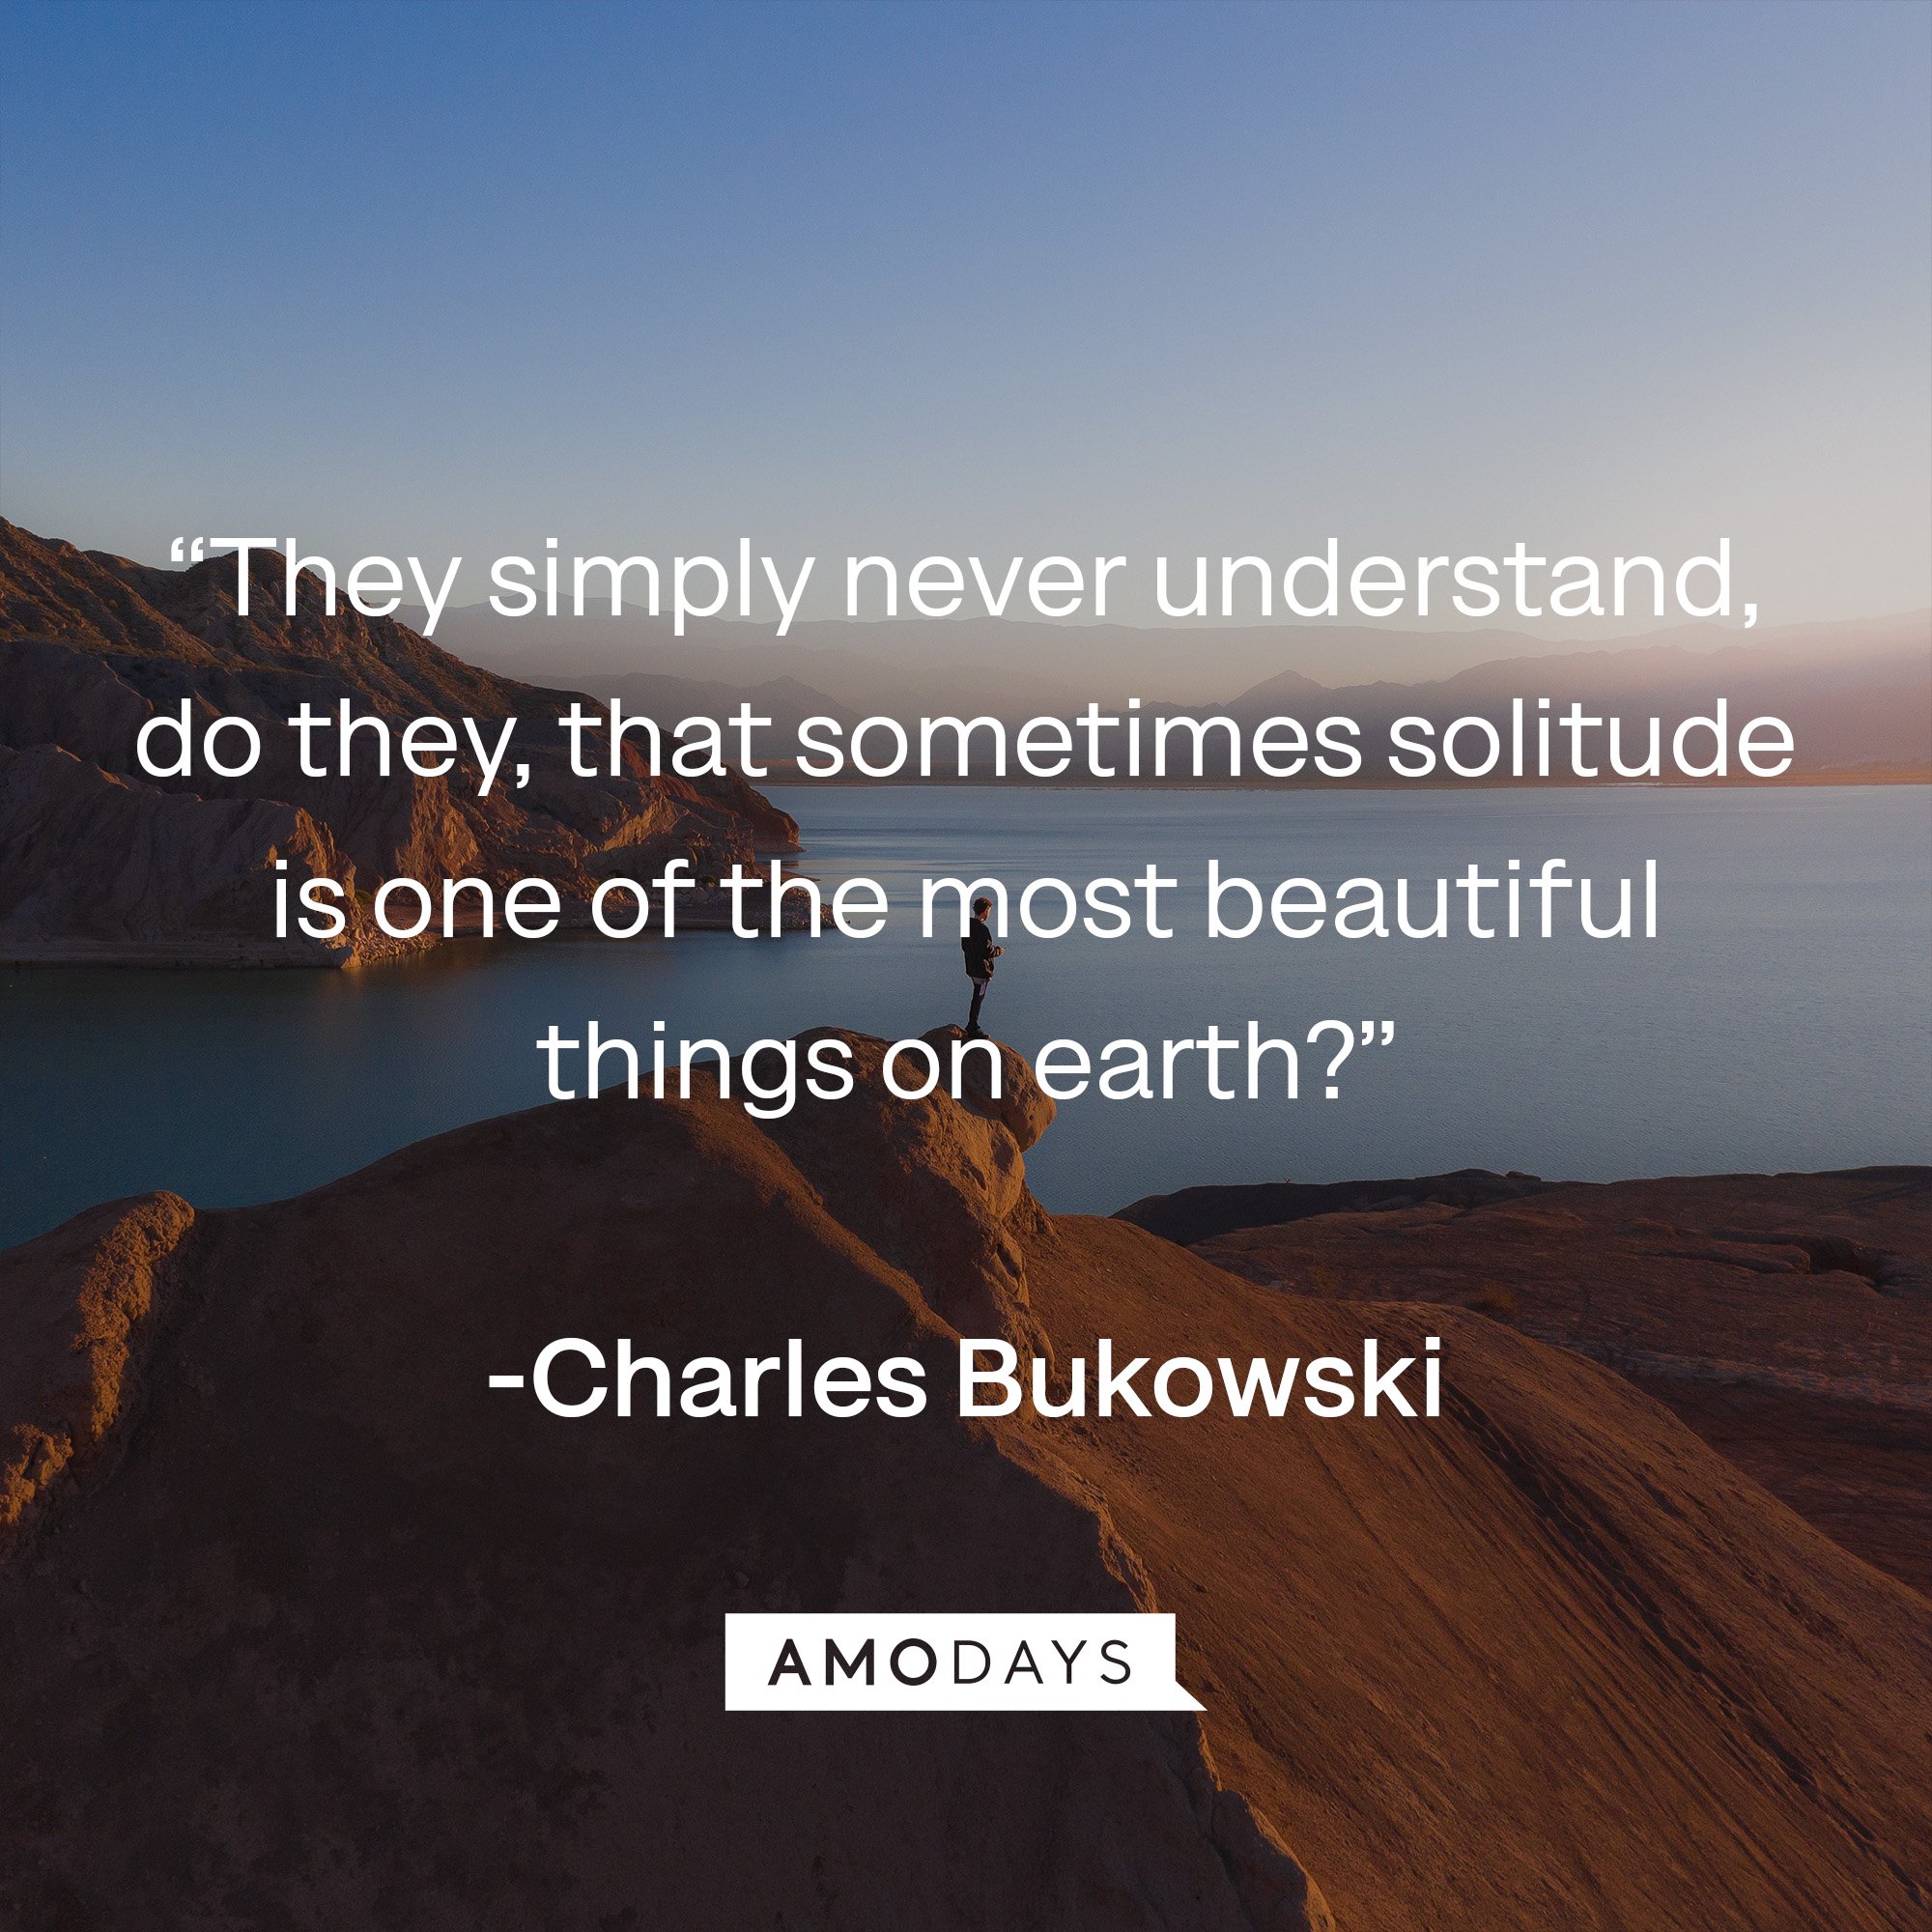 Charles Bukowski‘s quote: “They simply never understand, do they, that sometimes solitude is one of the most beautiful things on earth?”| Image: Amodays